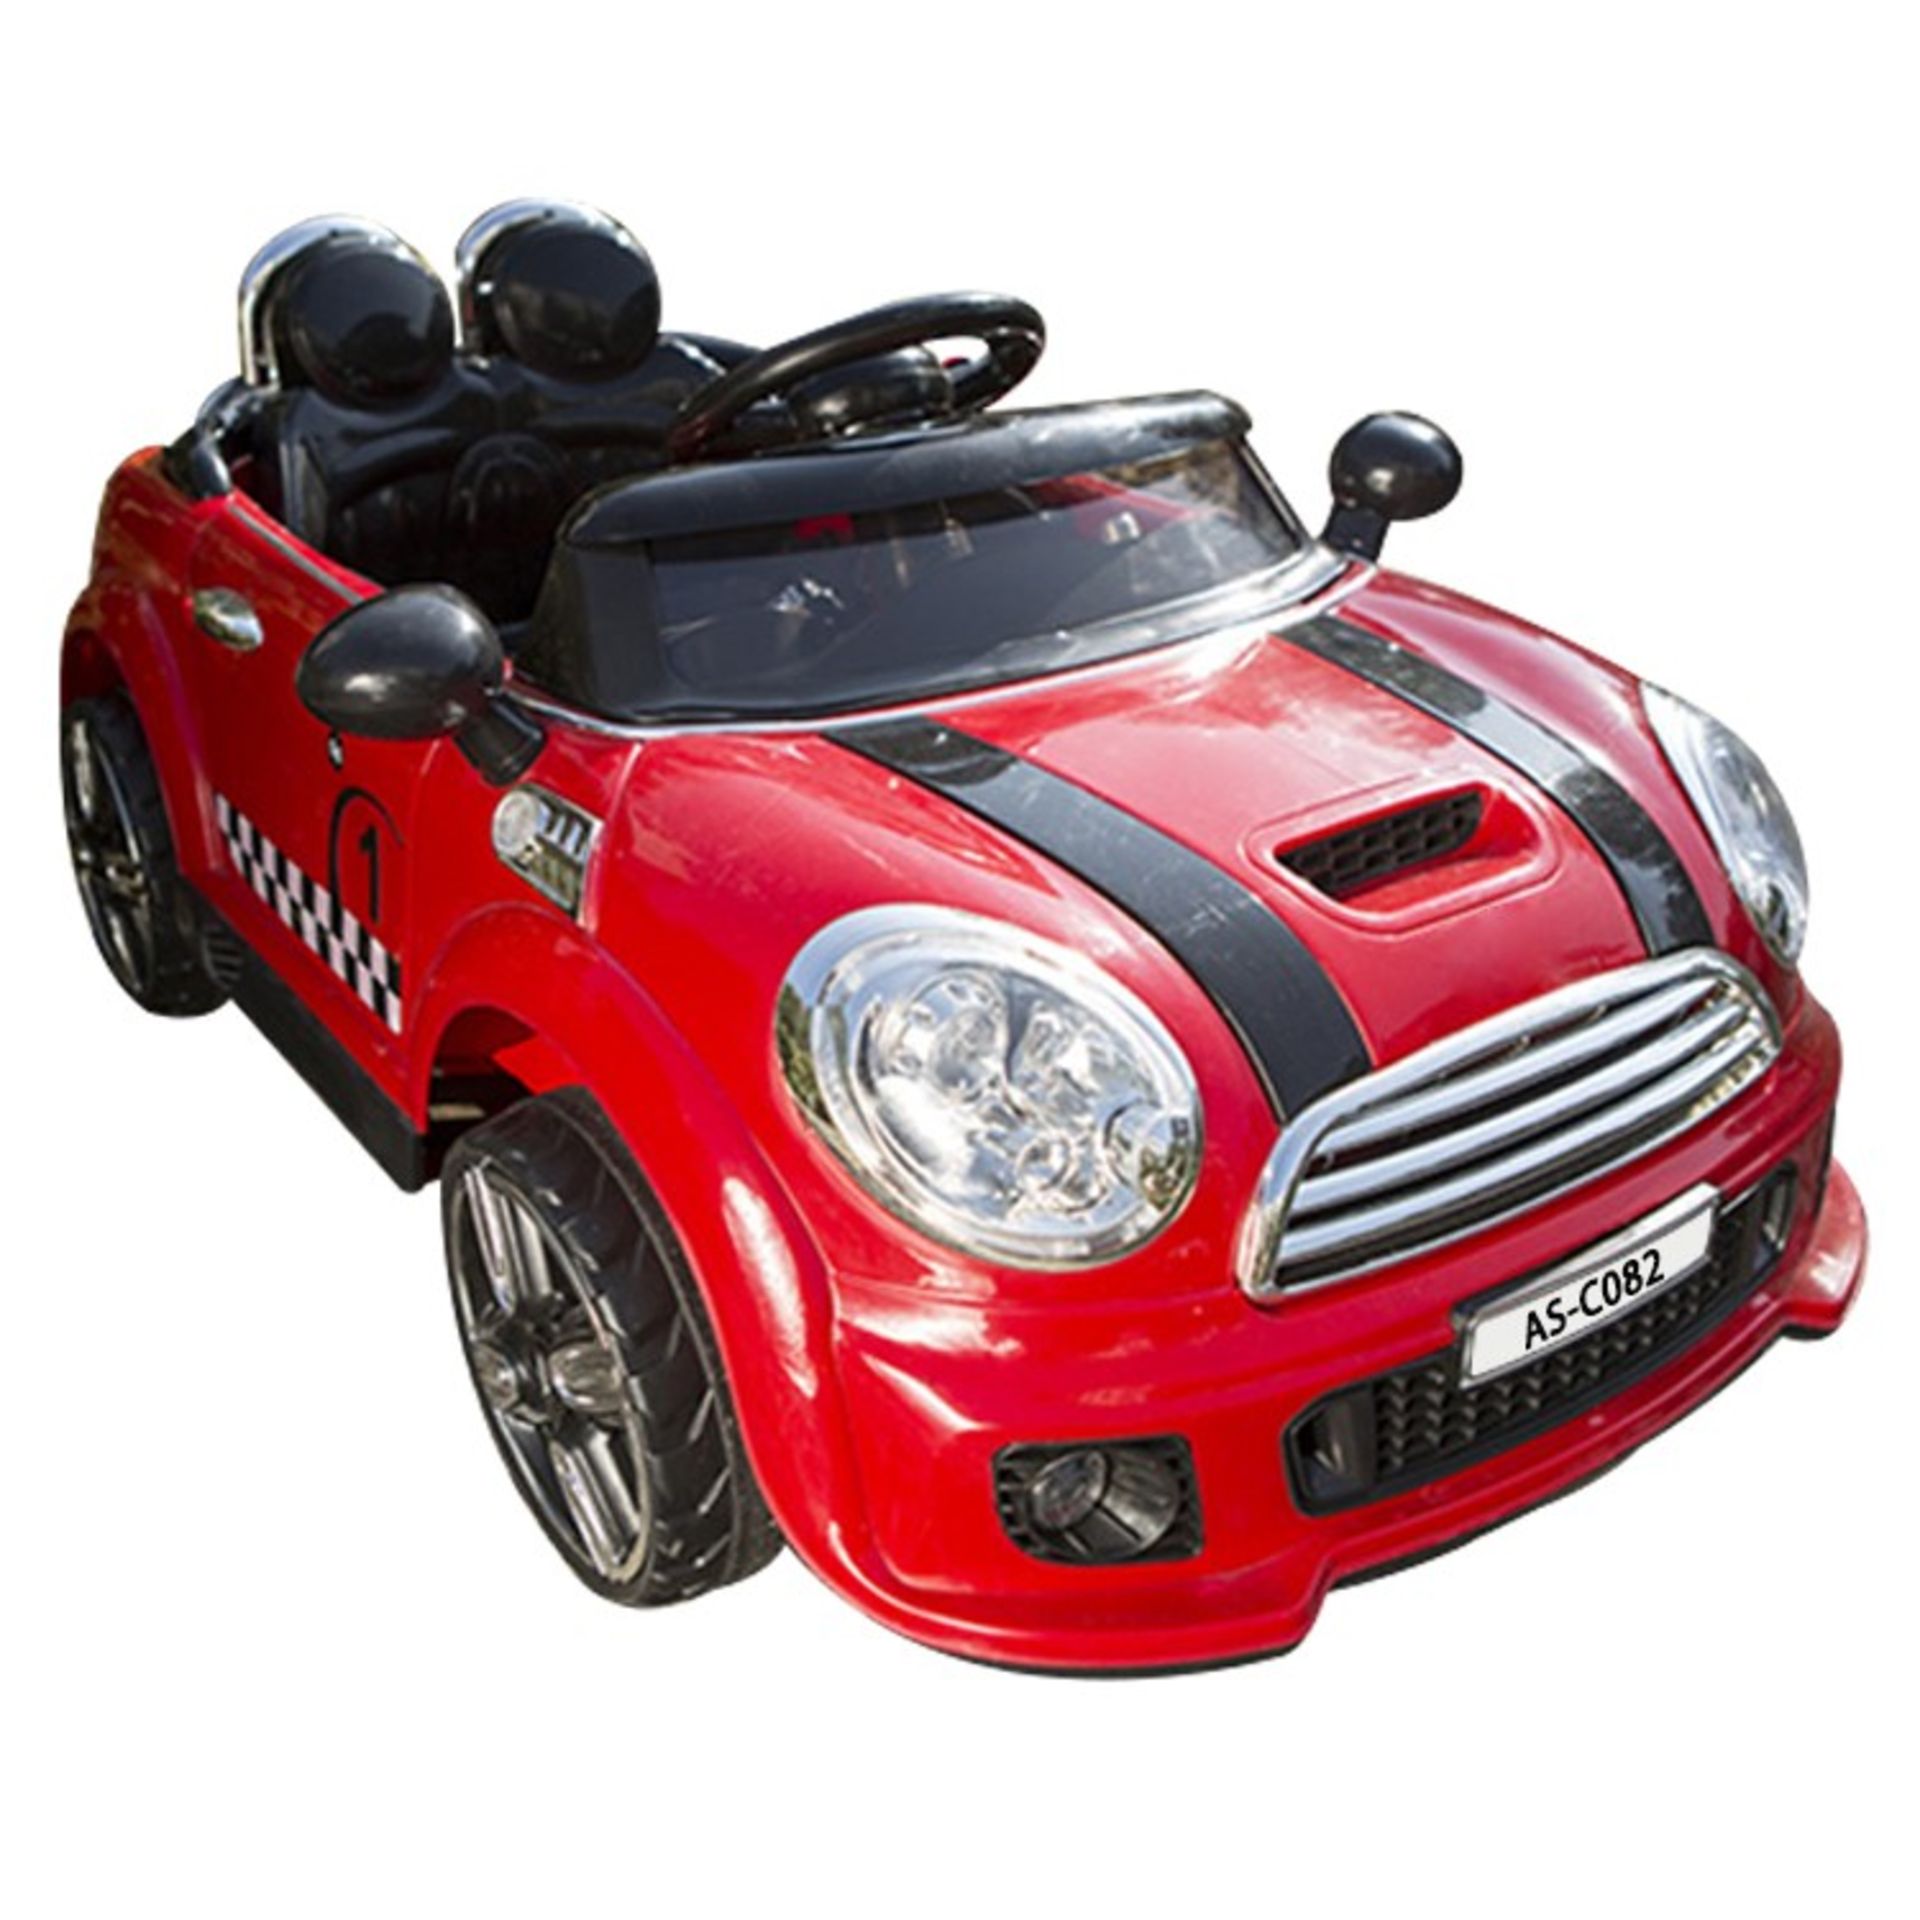 BRAND NEW BOXED MINI COOPER STYLE CHILDRENS SIT AND RIDE CAR IN RED AND BLACK WITH 27MHZ REMOTE